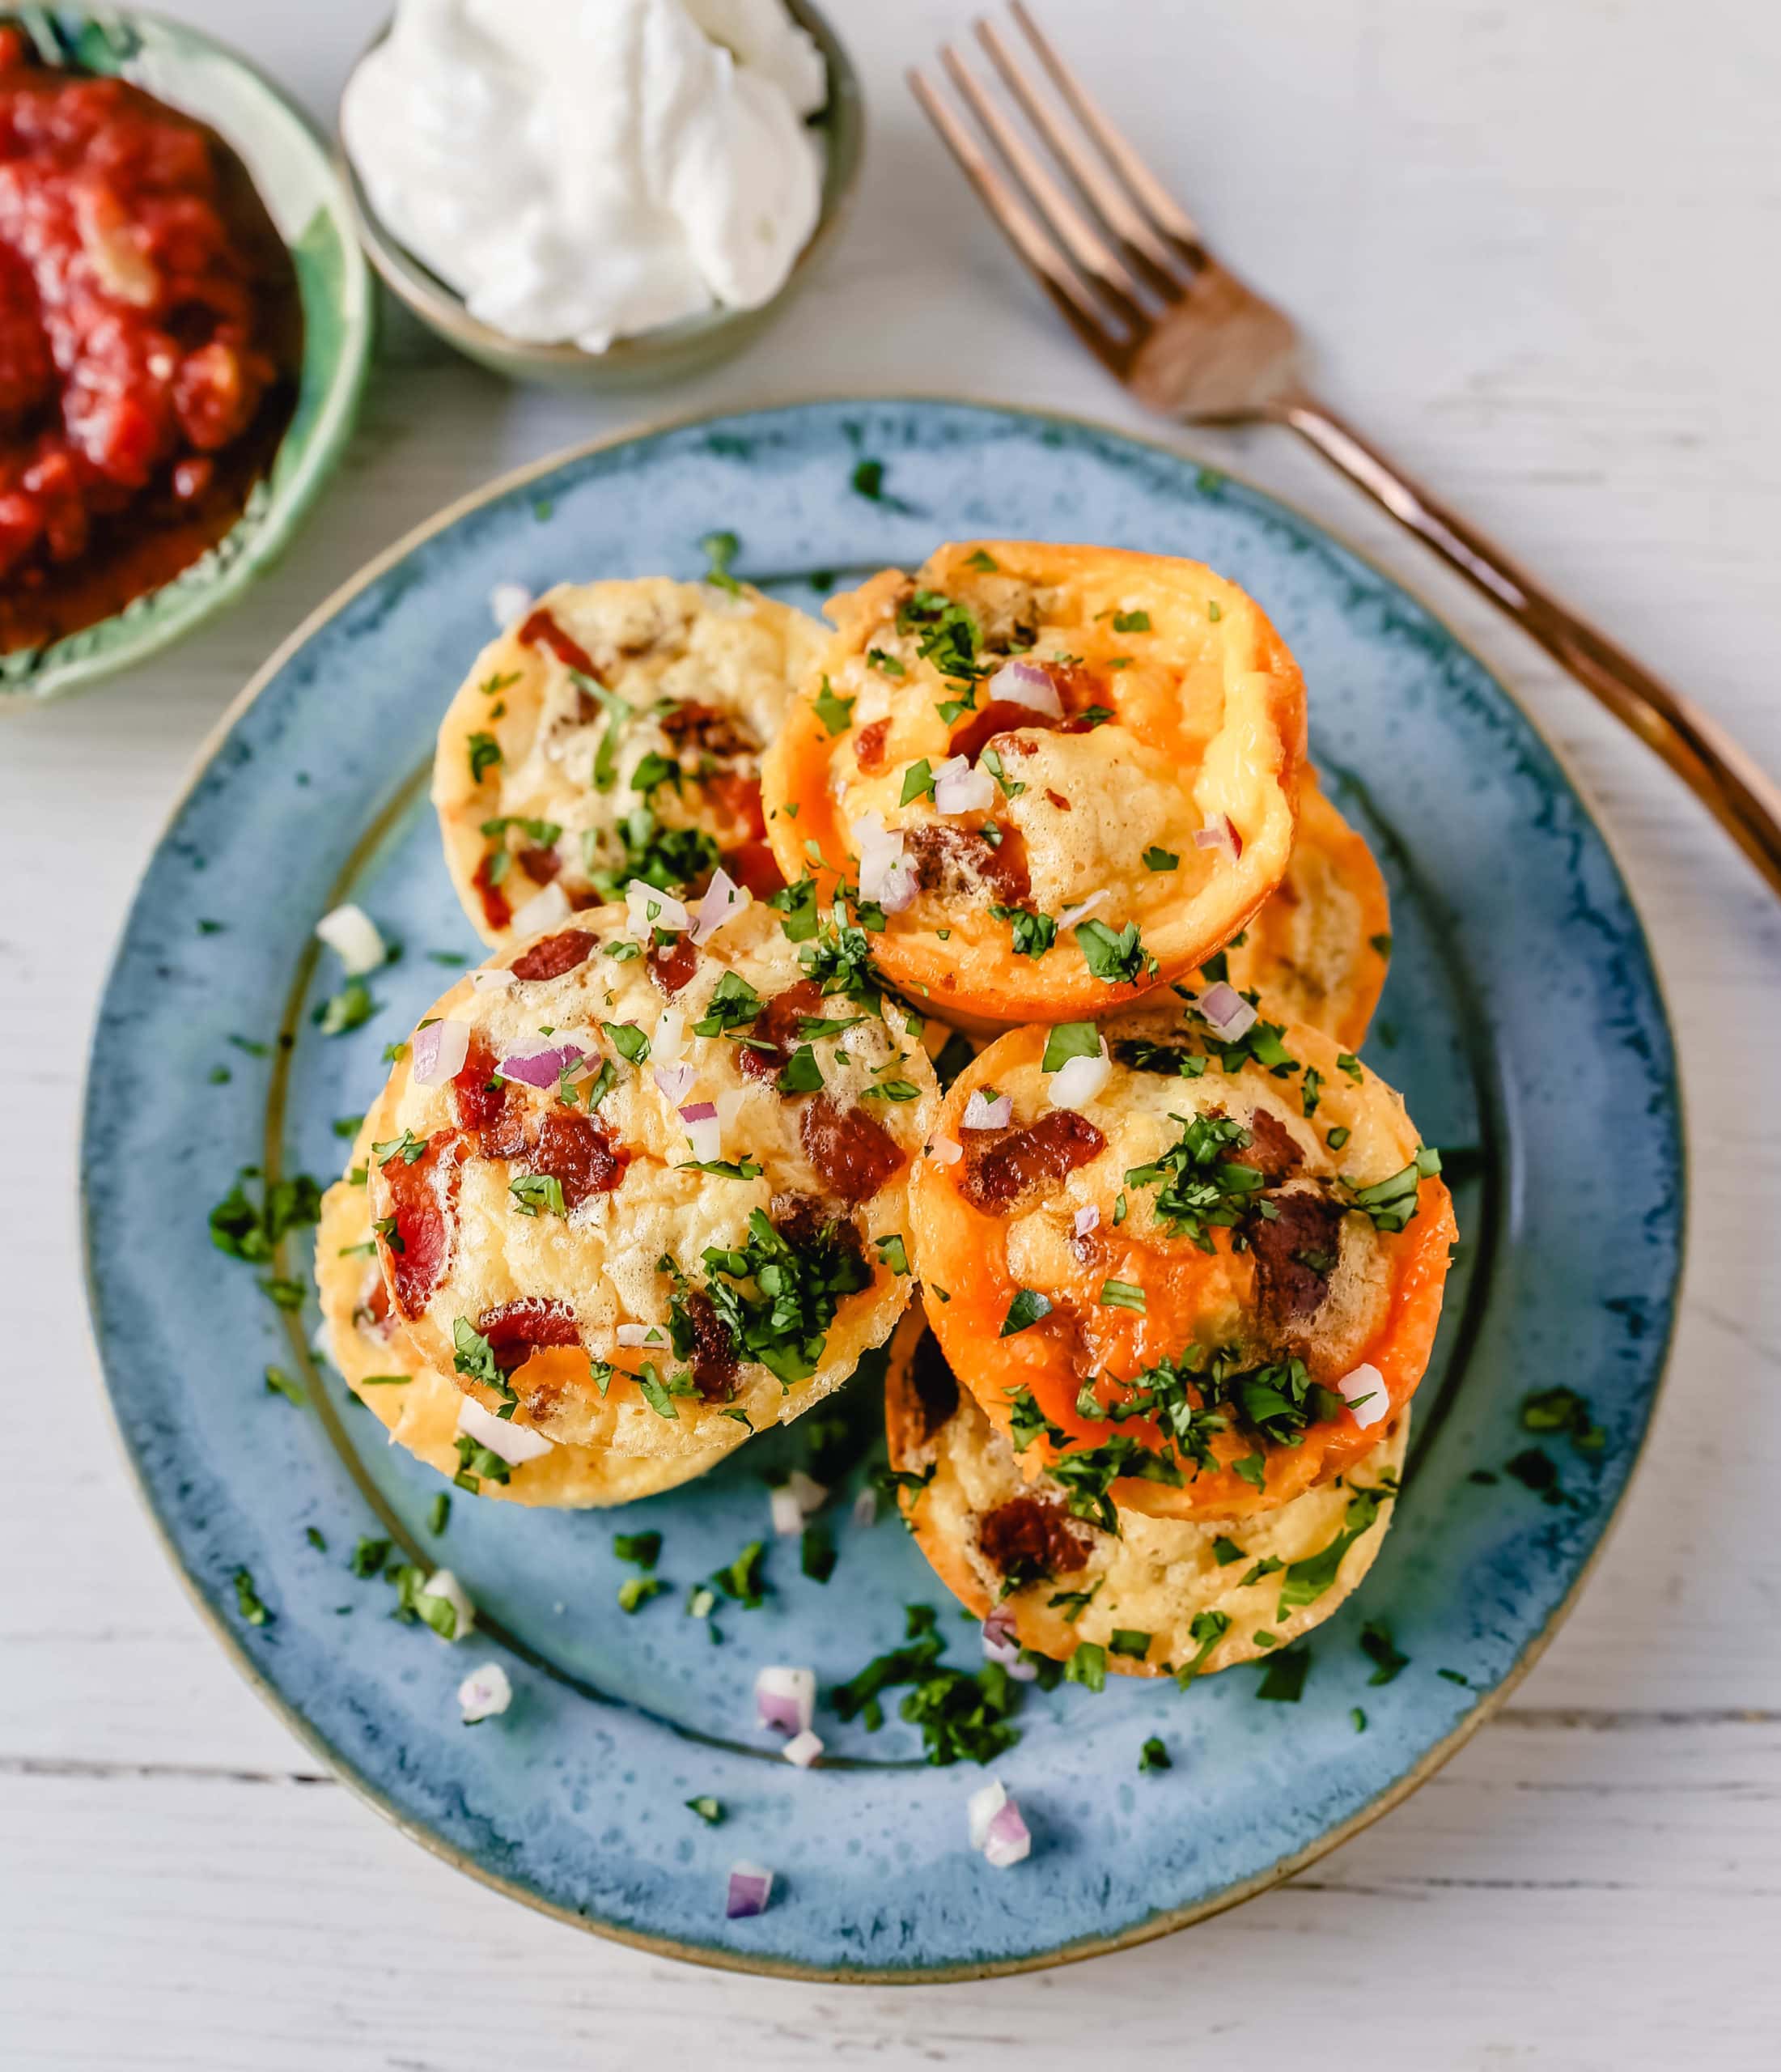 Mini Egg Bacon and Cheese Bites A quick and easy bite-size high-protein and low-carb breakfast. These mini egg bites are the perfect start for your day! www.modernhoney.com #eggbites #eggbaconbites #breakfast